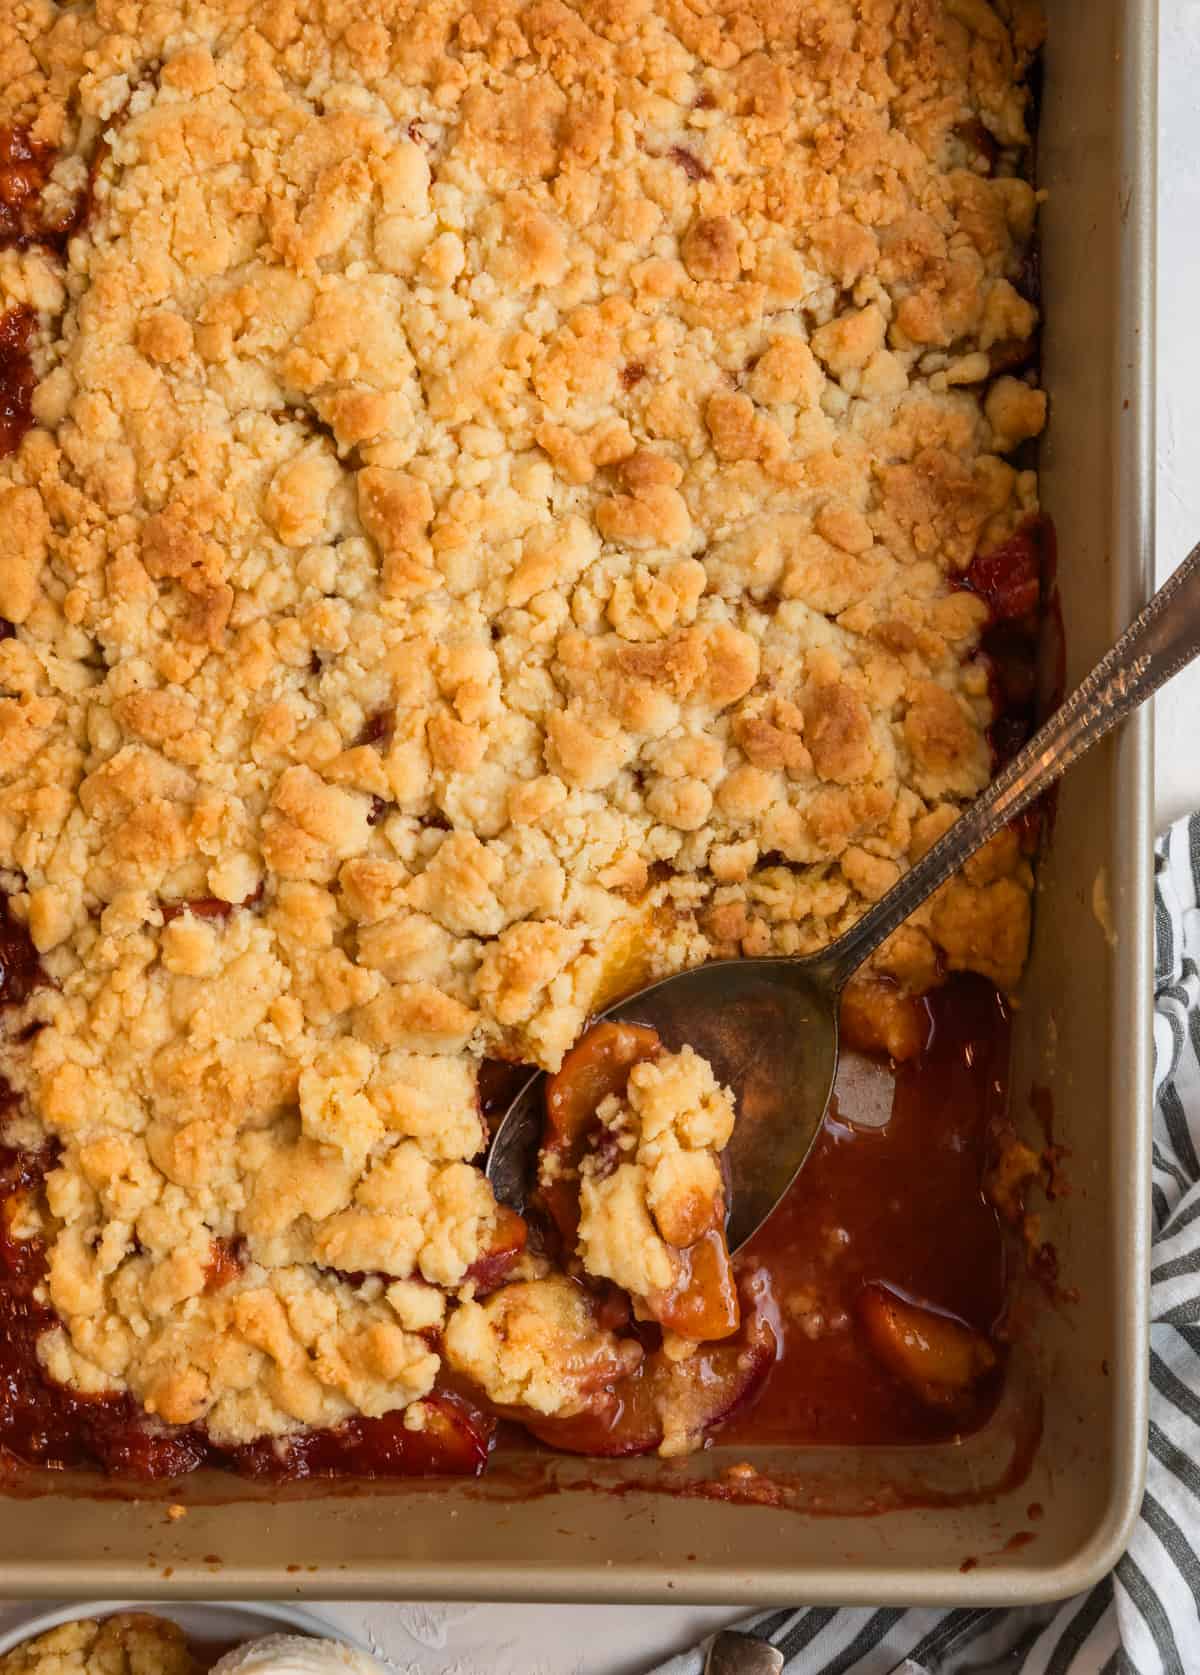 Cake mix peach cobbler in baking pan with spoon scooping out a section.